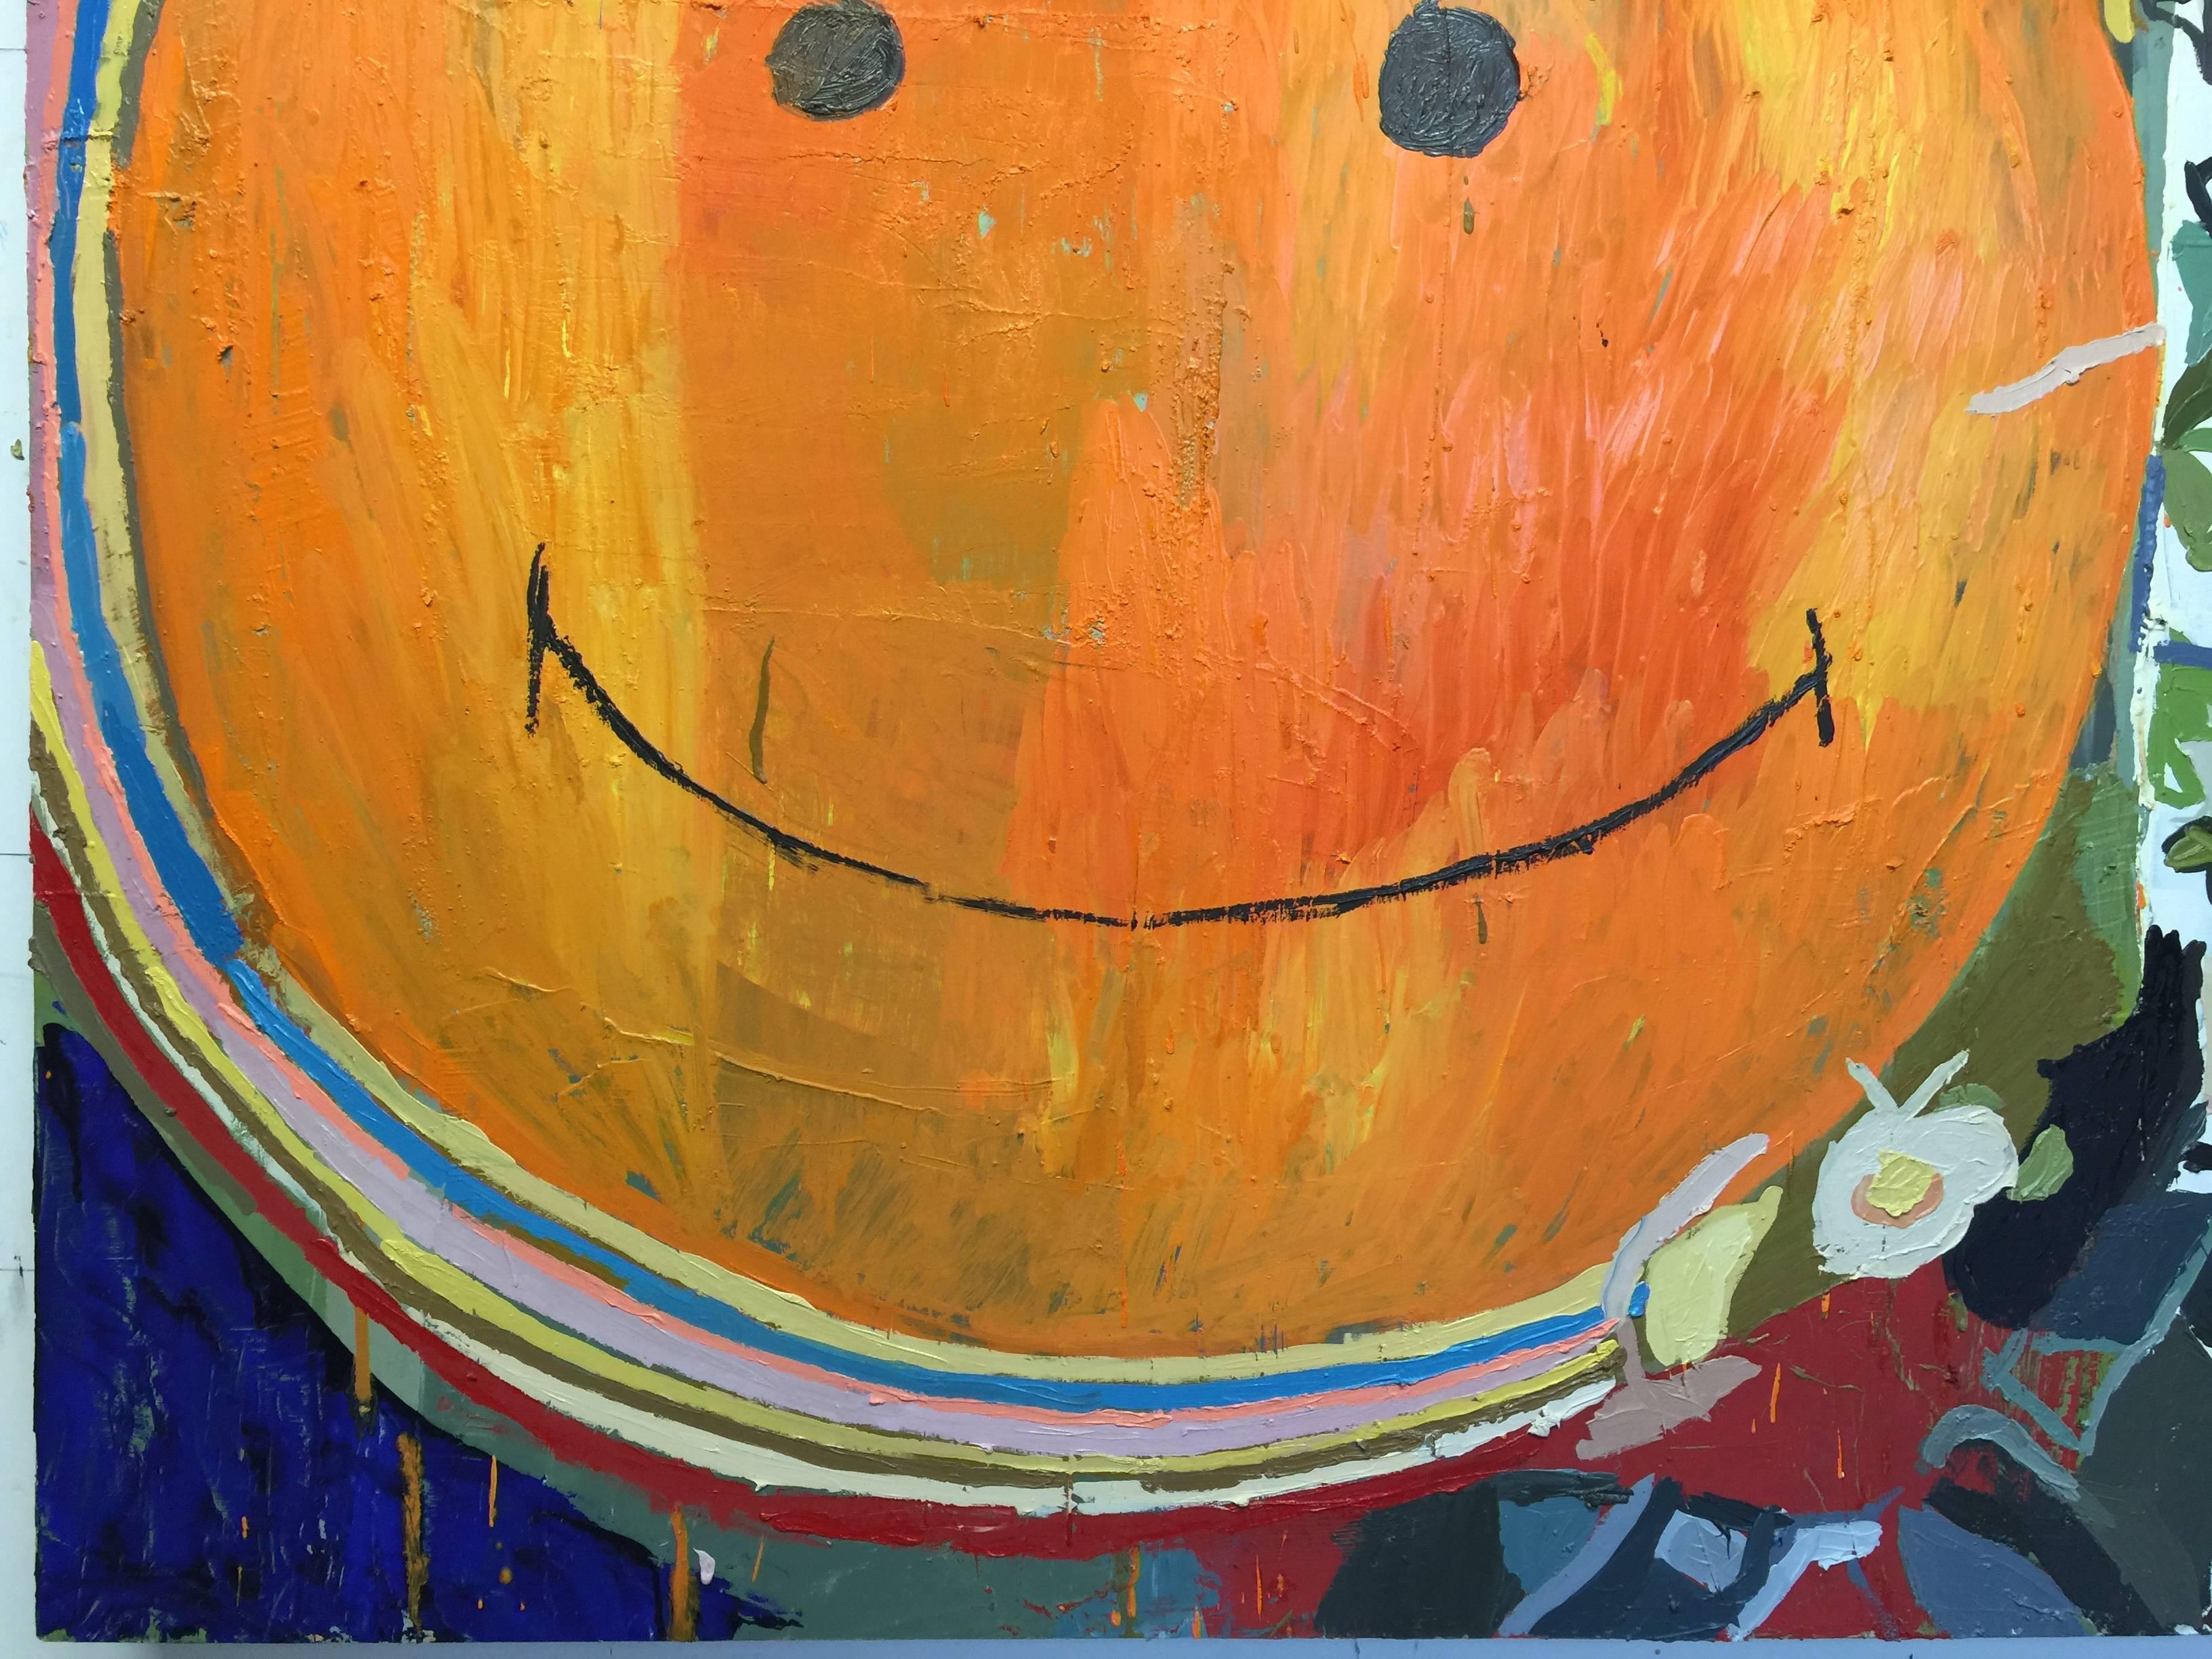 Plywood American Pharoah and Smiley Face Oil Painting by NYC Artist Clintel Steed, 2015